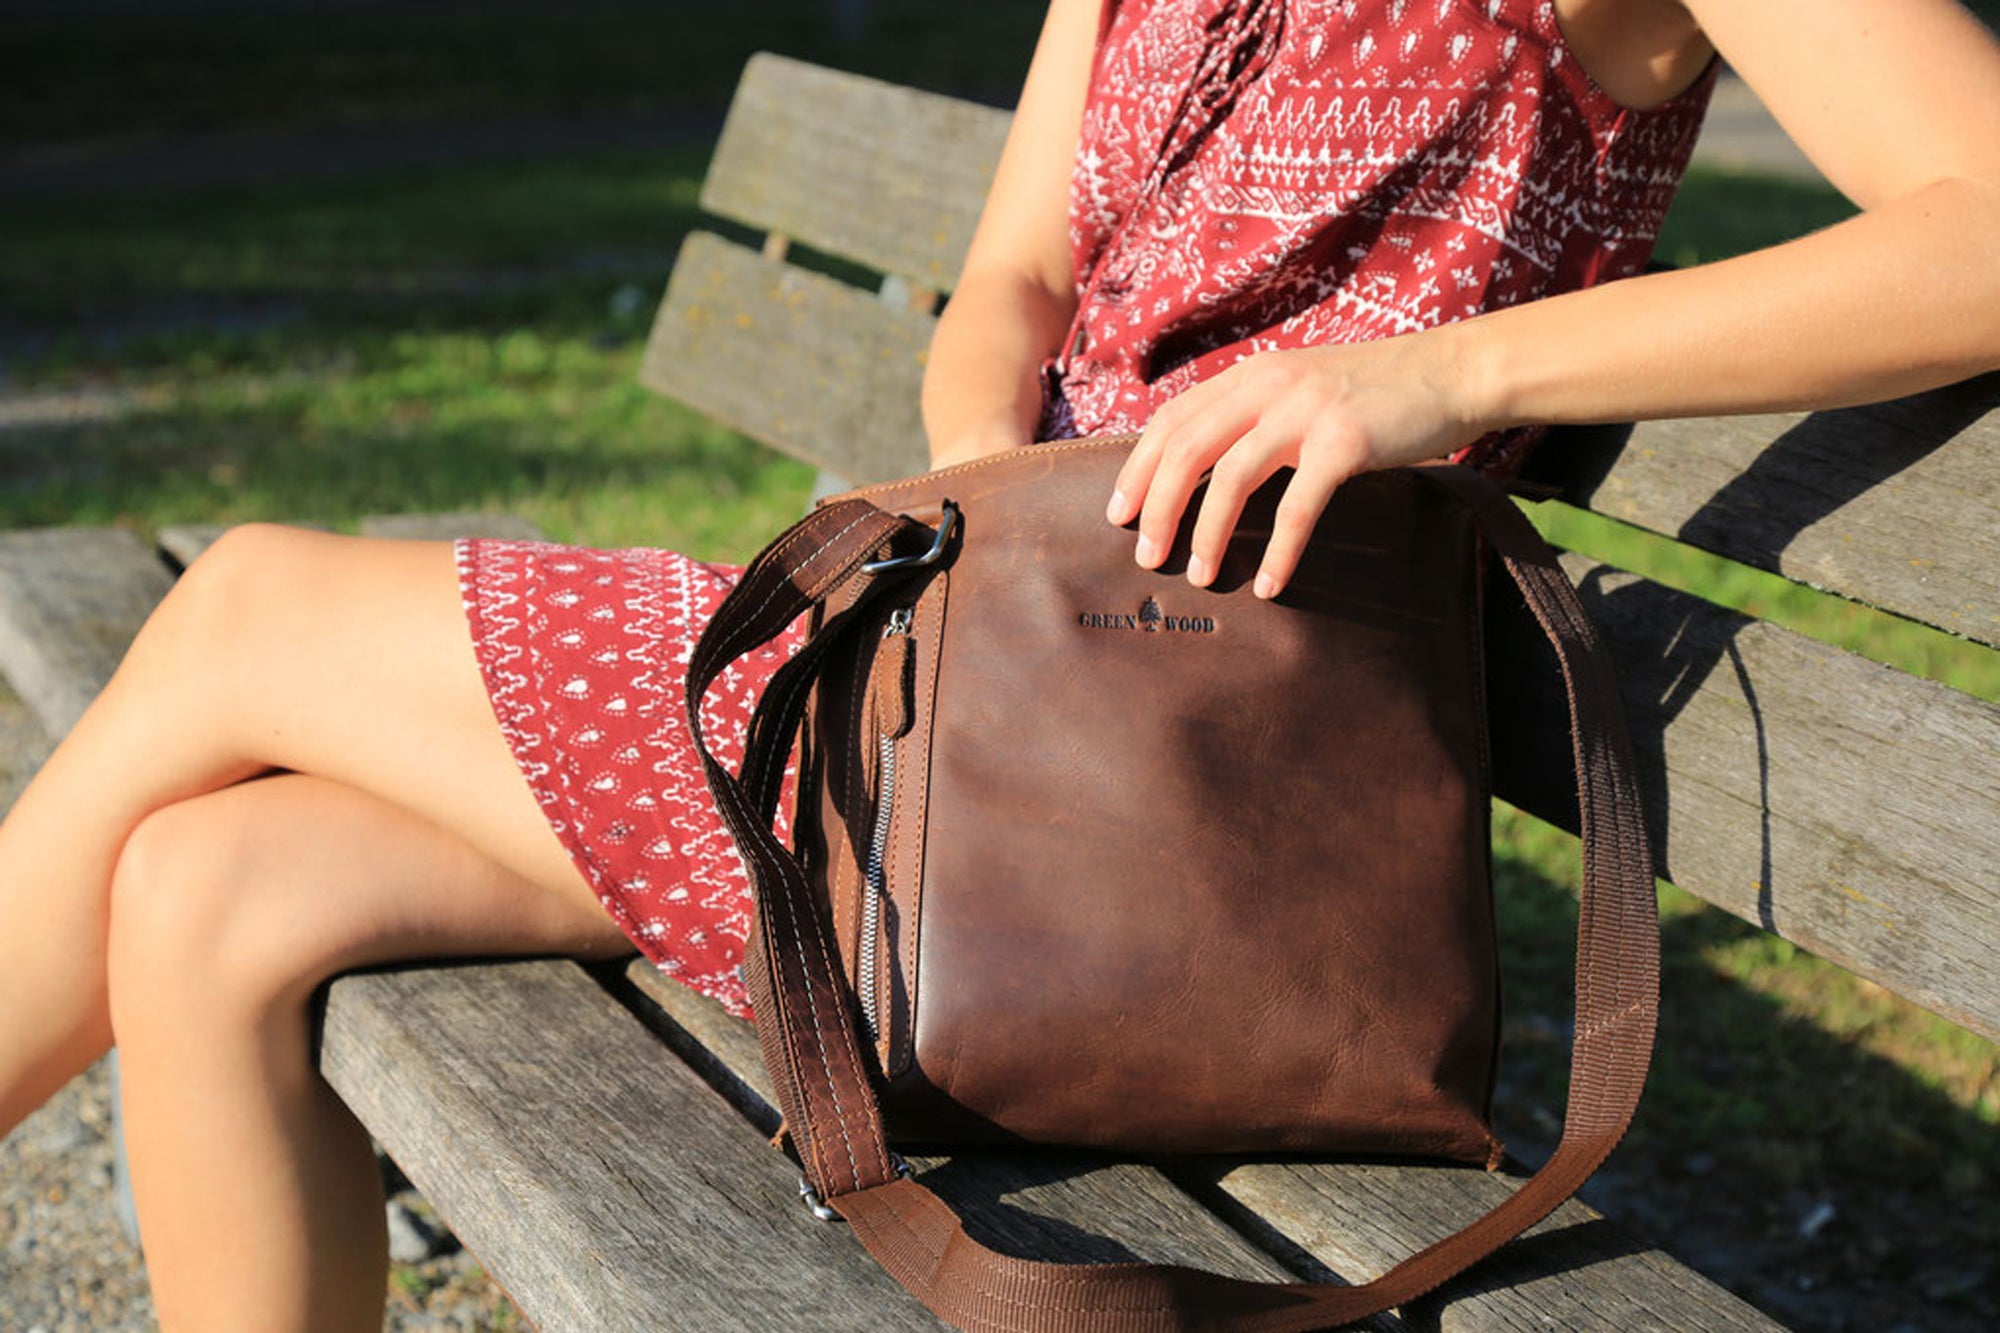 Economic skinny Unparalleled Greenwood Leather Bags: Finest Quality Handmade Leather Goods